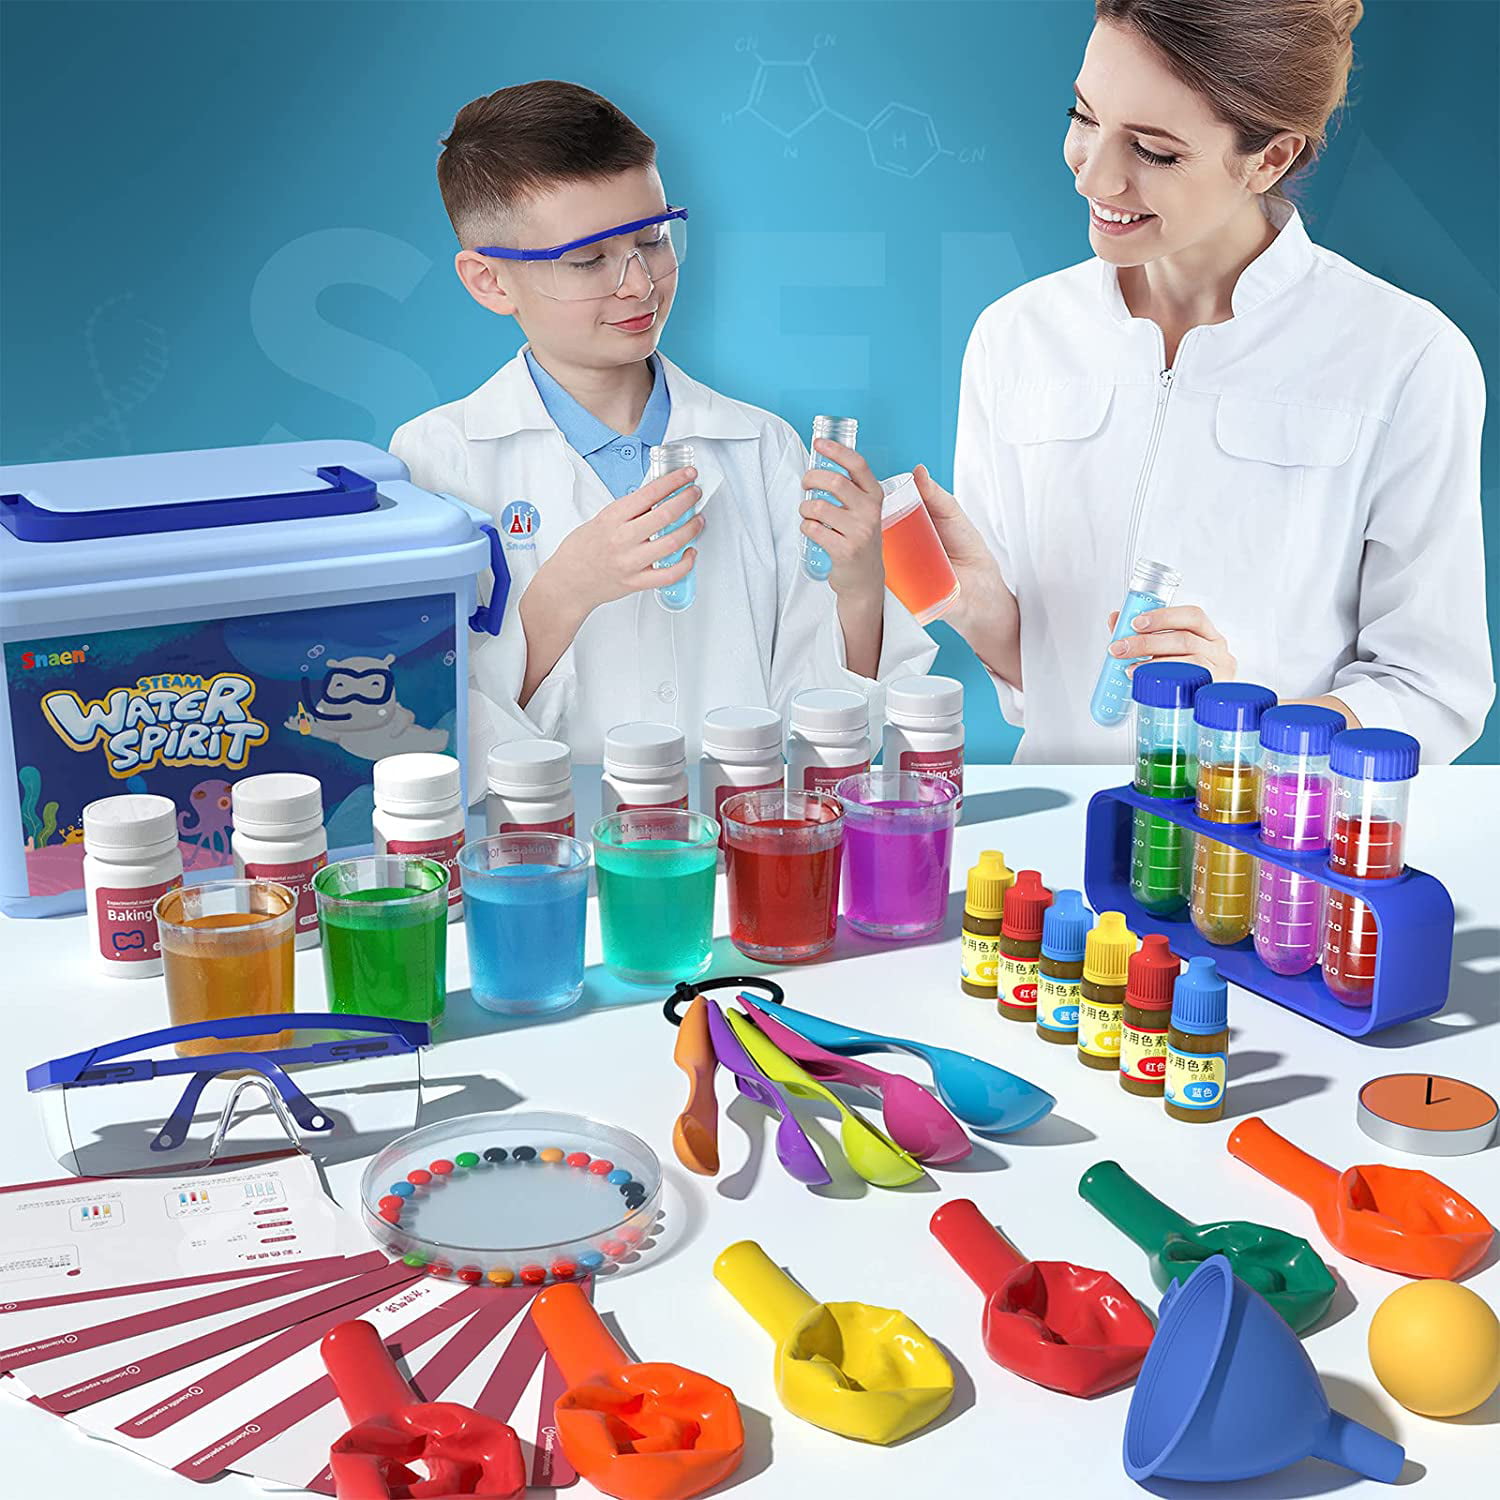 STEM Toy for Aged 3-8 SNAEN Kids Science Experiment Kit with Scientist Costume 